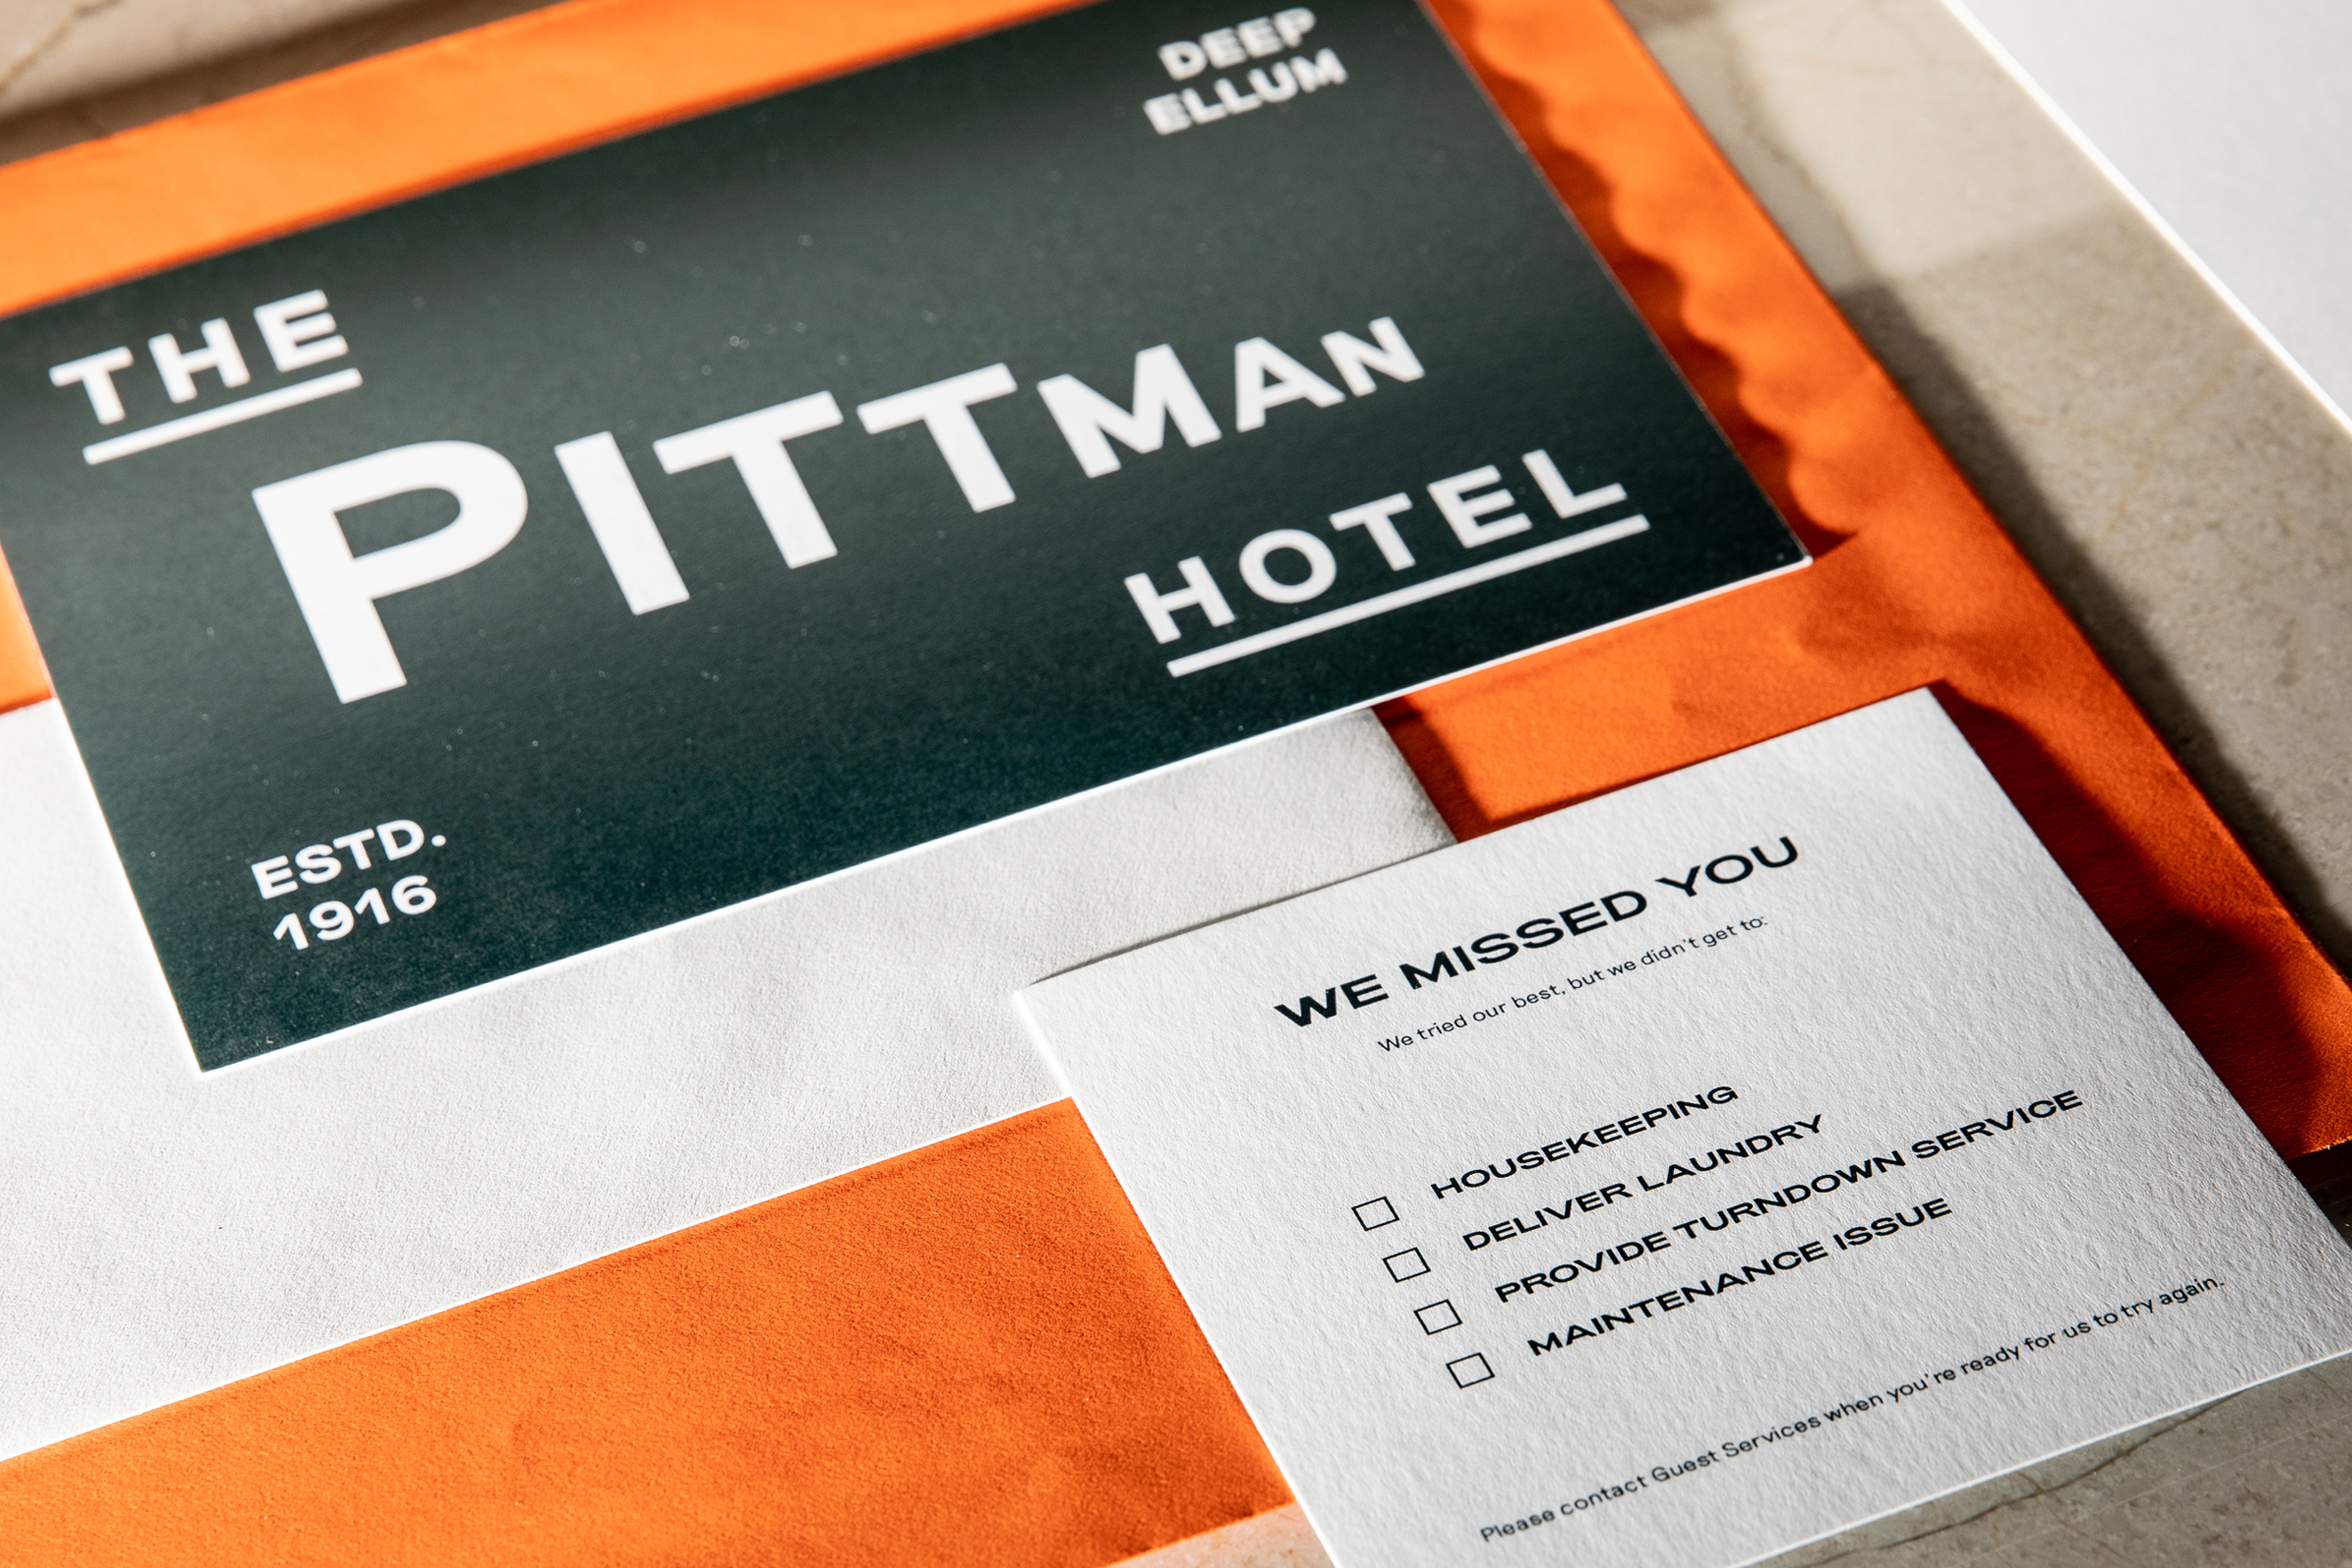 Assets for The Pittman Hotel in Dallas, TX designed by Tractorbeam